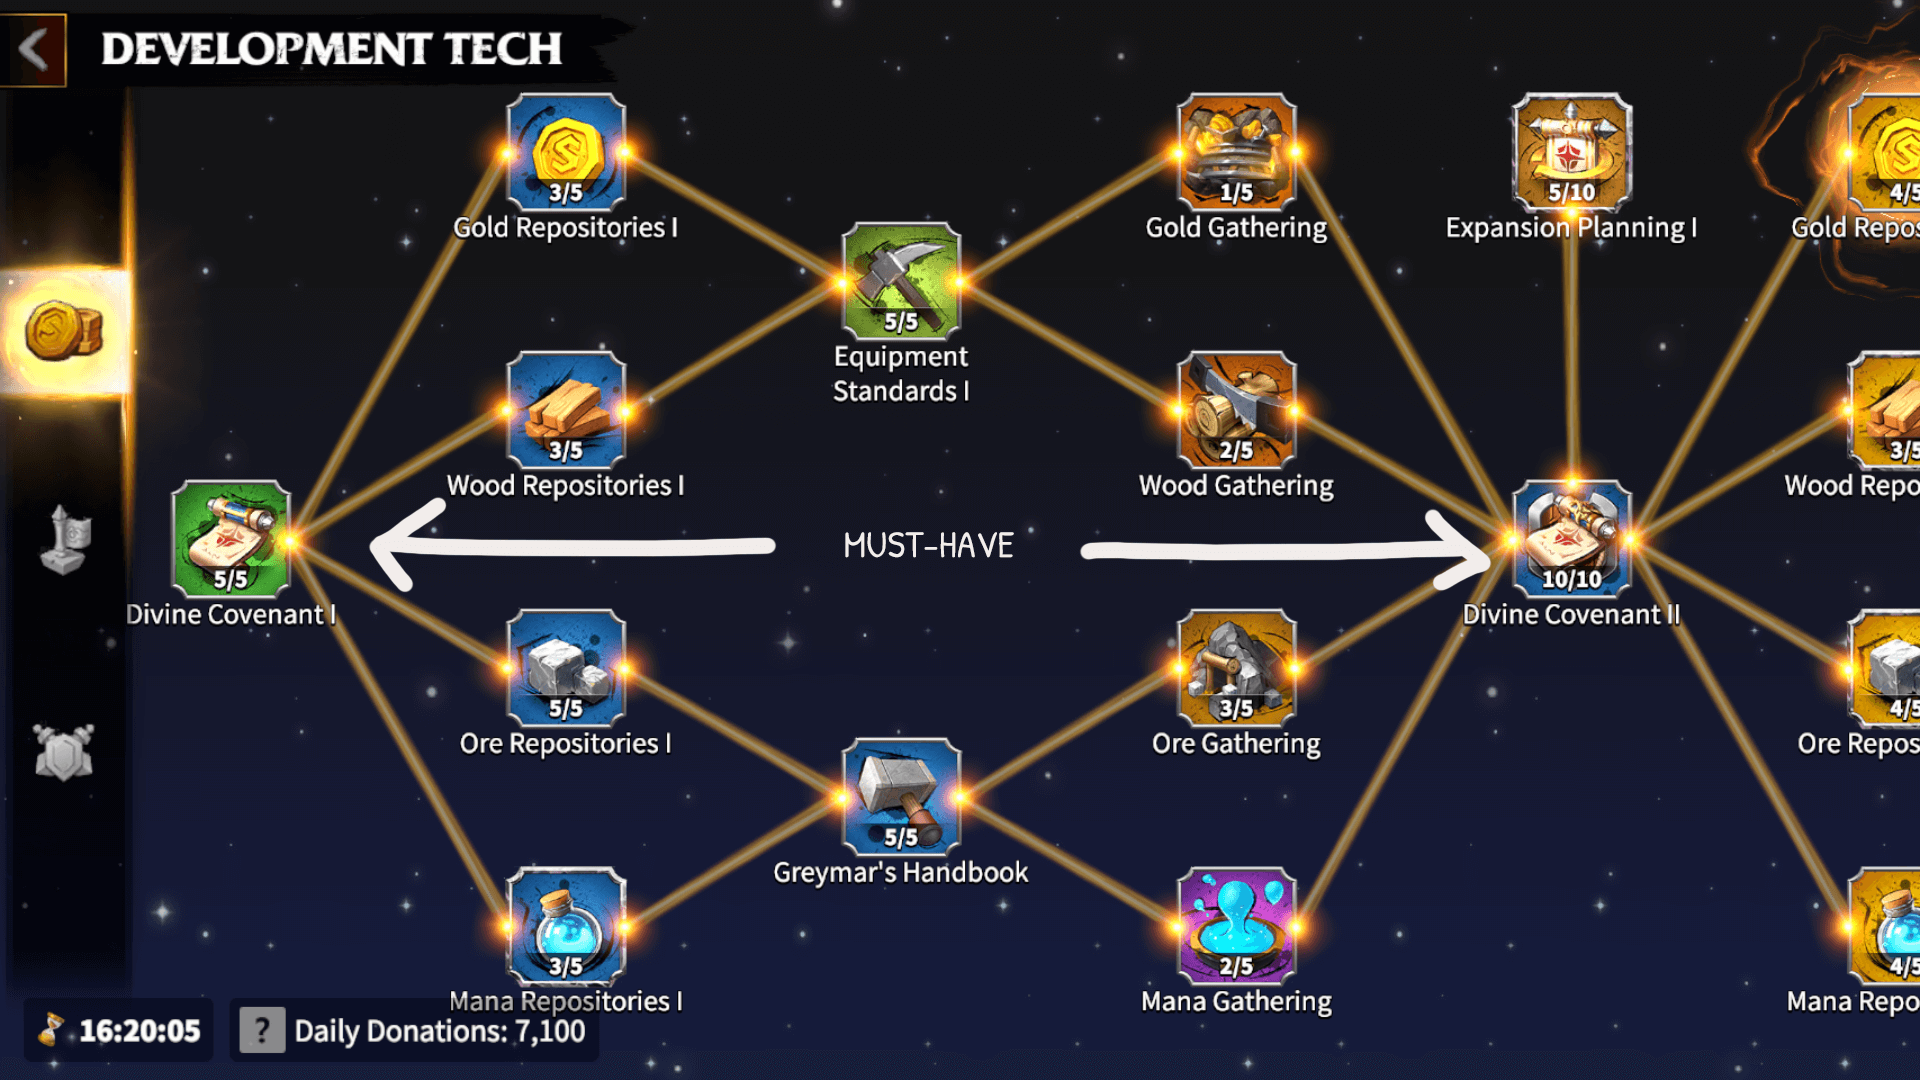 Divine Covenant is very important in Alliance Tech